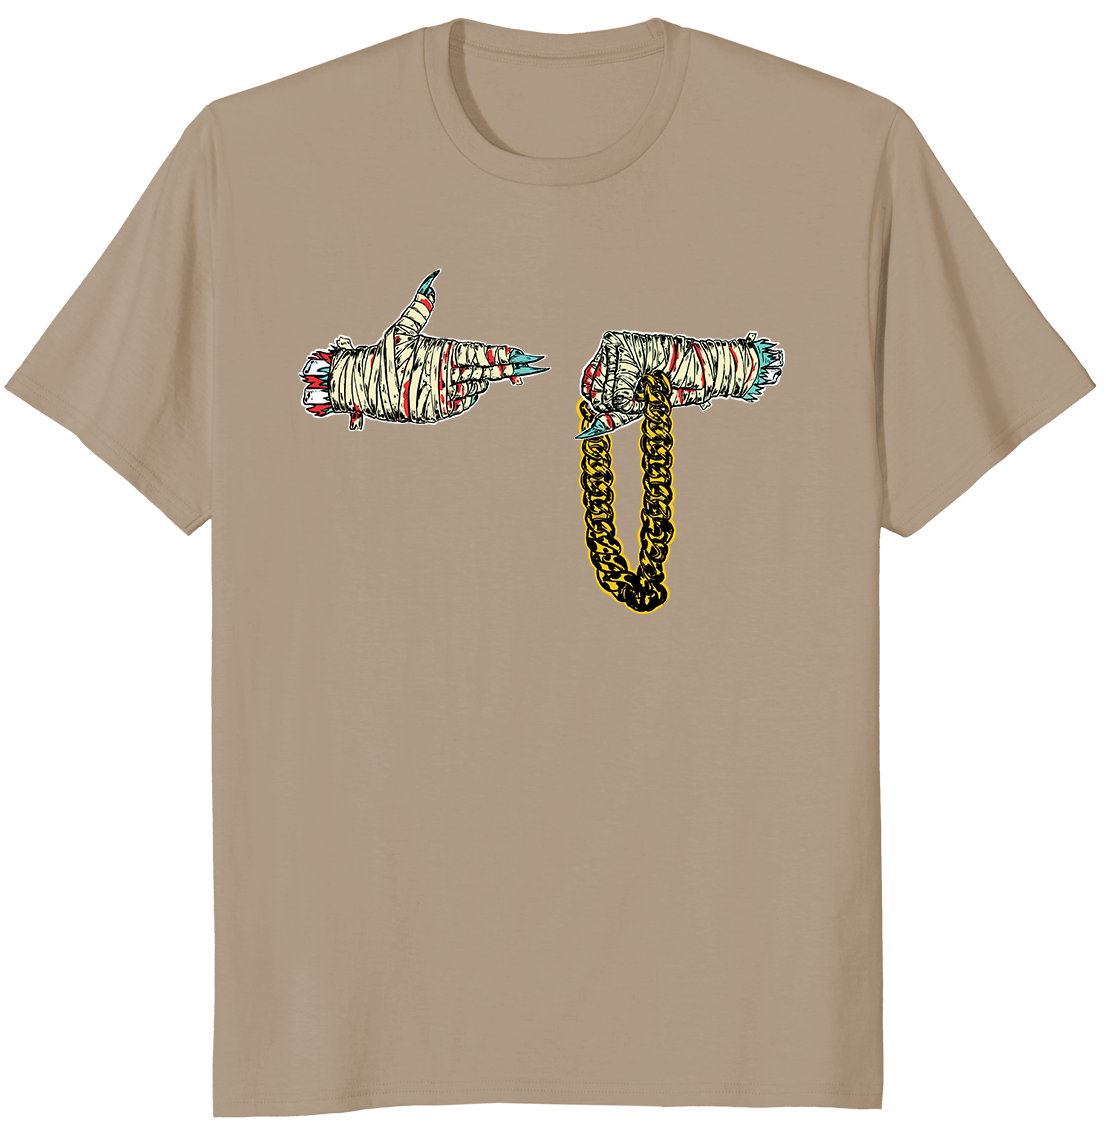 Run The Jewels | RTJ2 T-Shirt (Light Tan) | RTJ Official Store